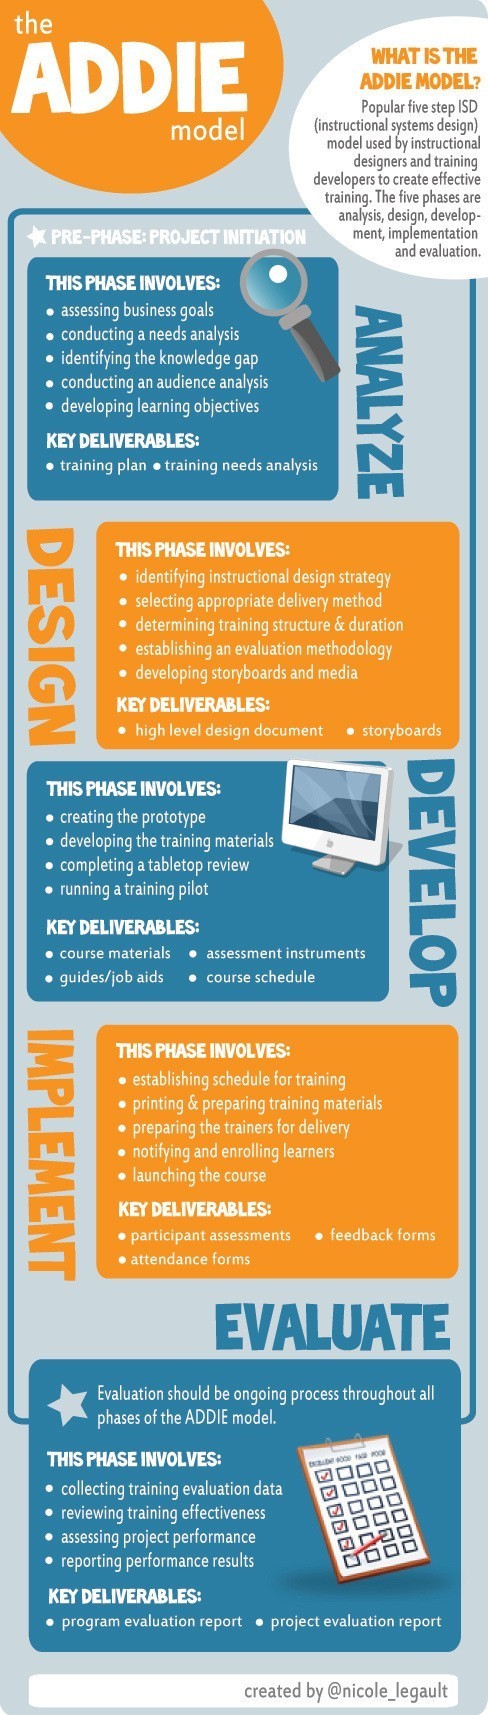 The ADDIE Instructional Design Model Infographic thumbnail